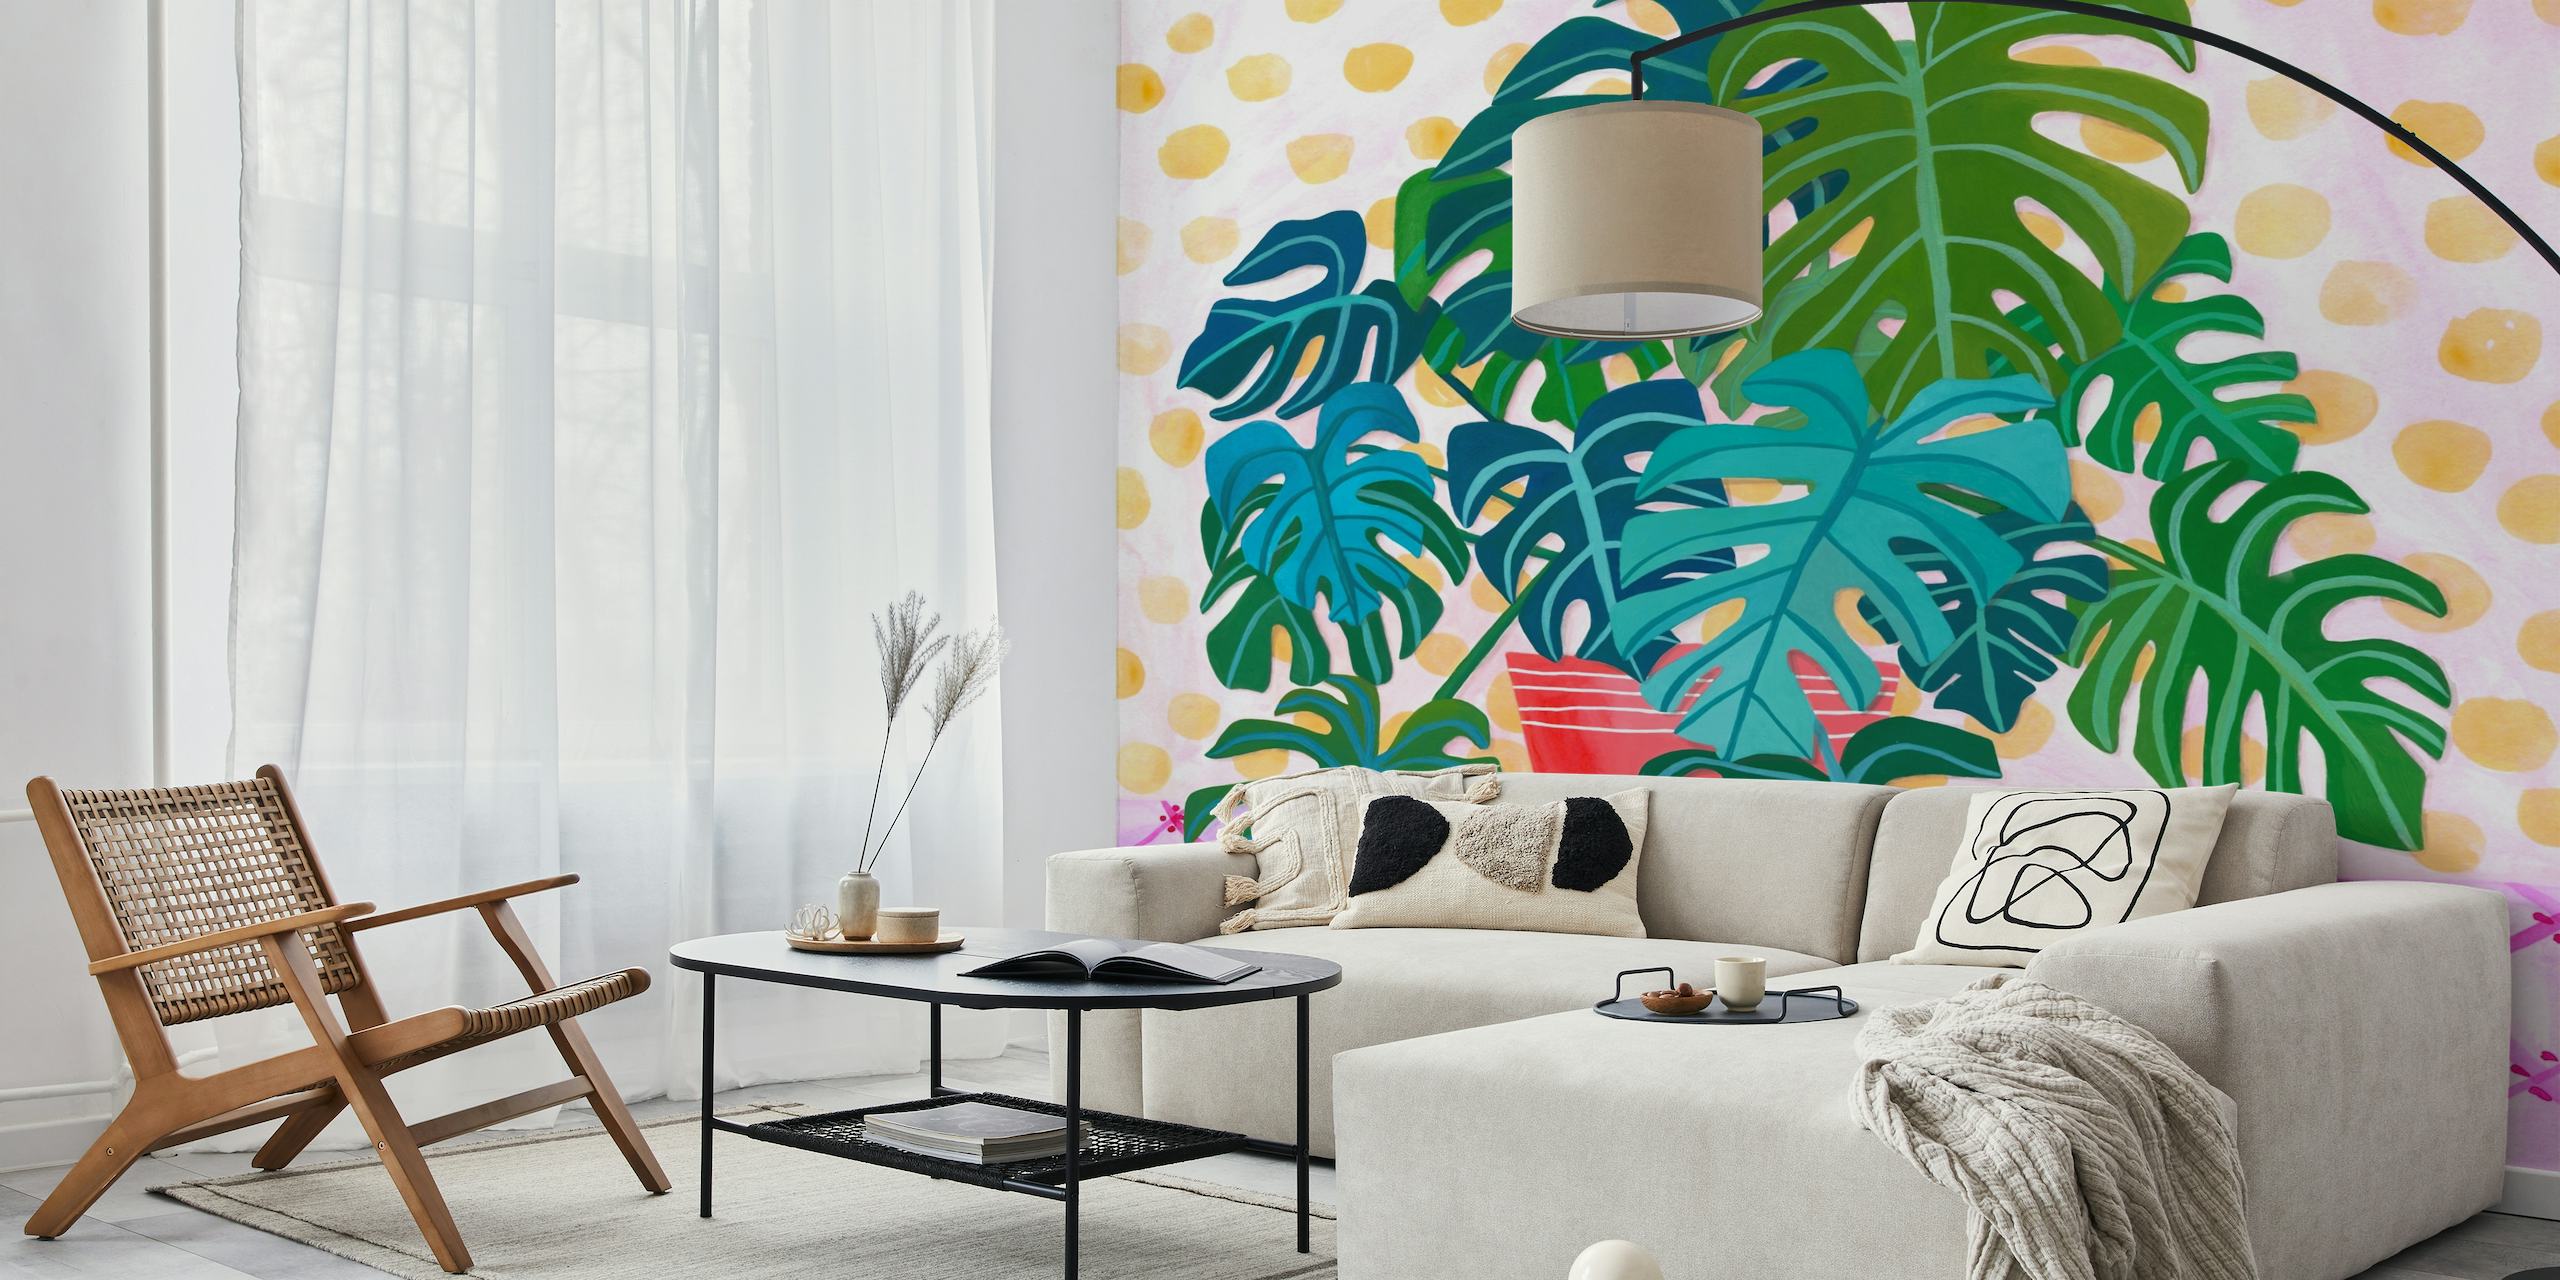 Artistic monstera leaves in a painted style with a pink polka-dotted background for a wall mural.